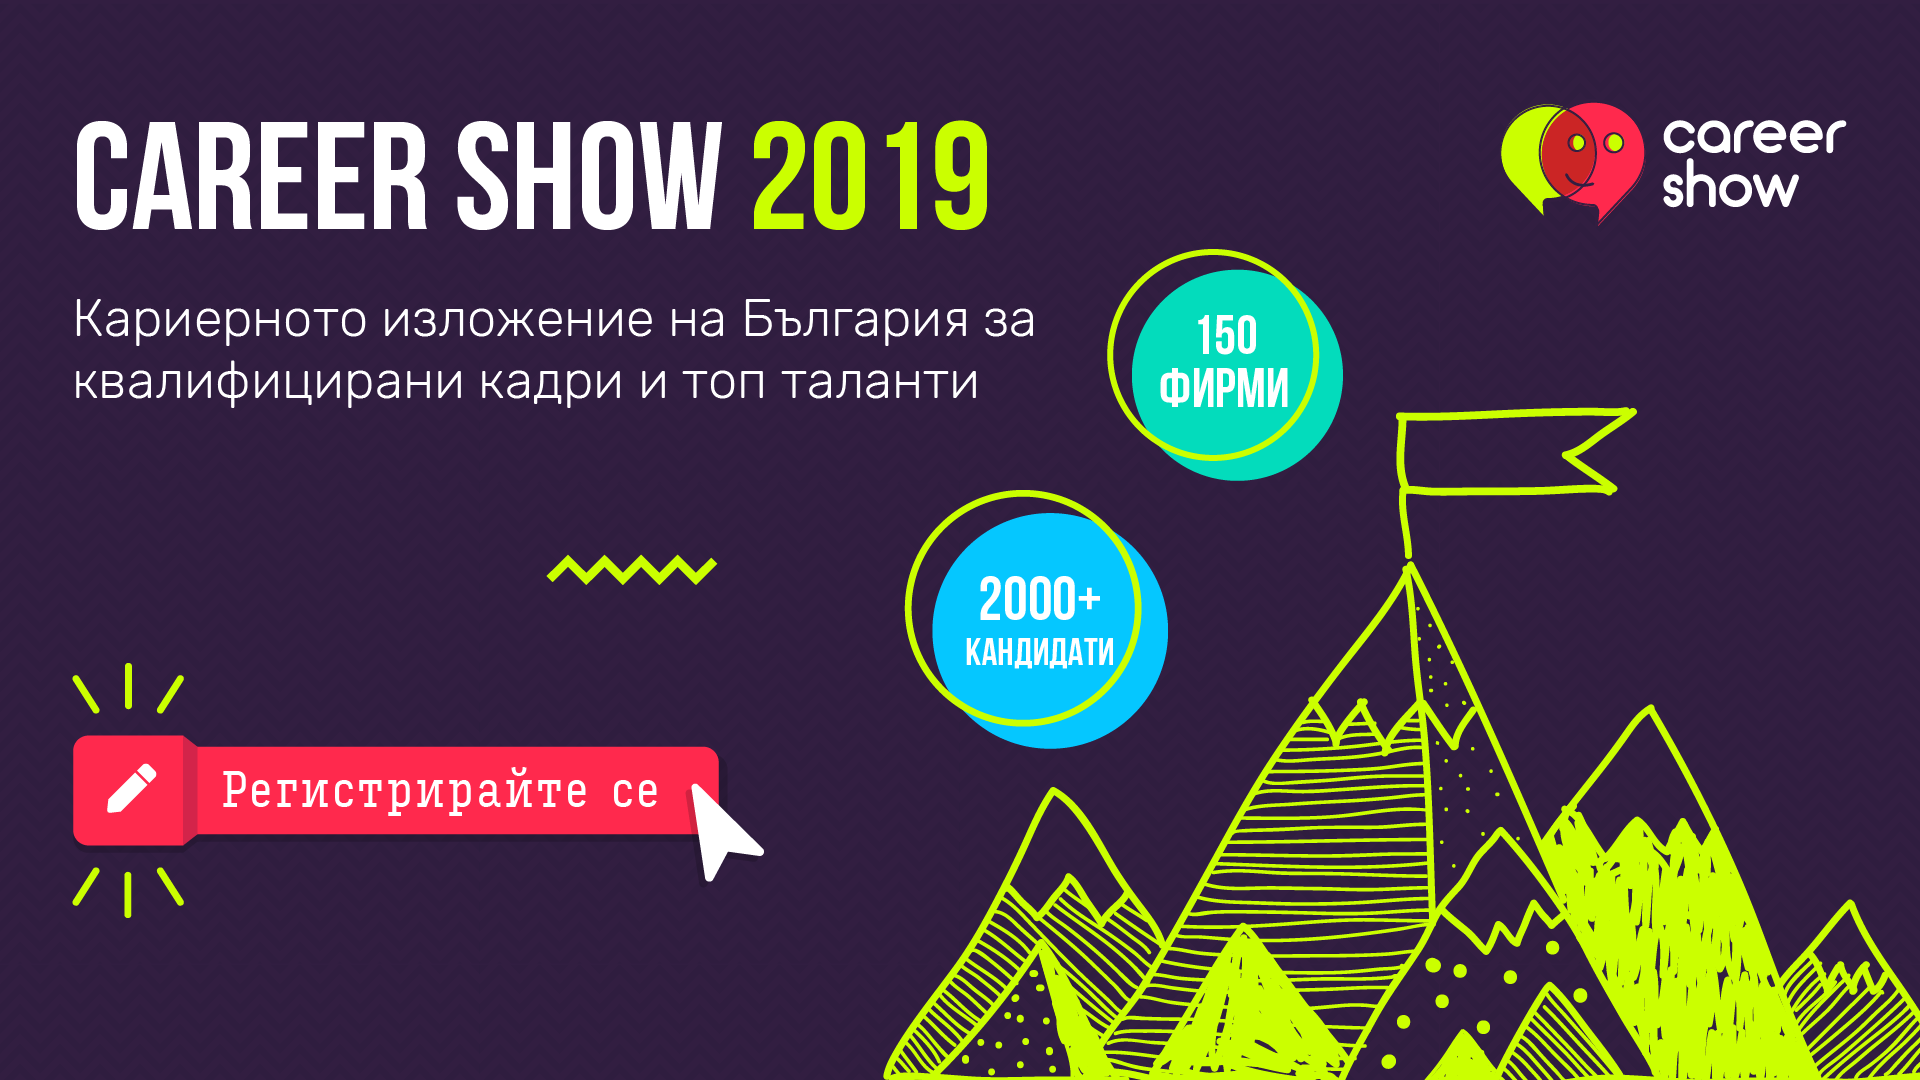 Bulgarian Industrial Association is partnering with Career Show 2019